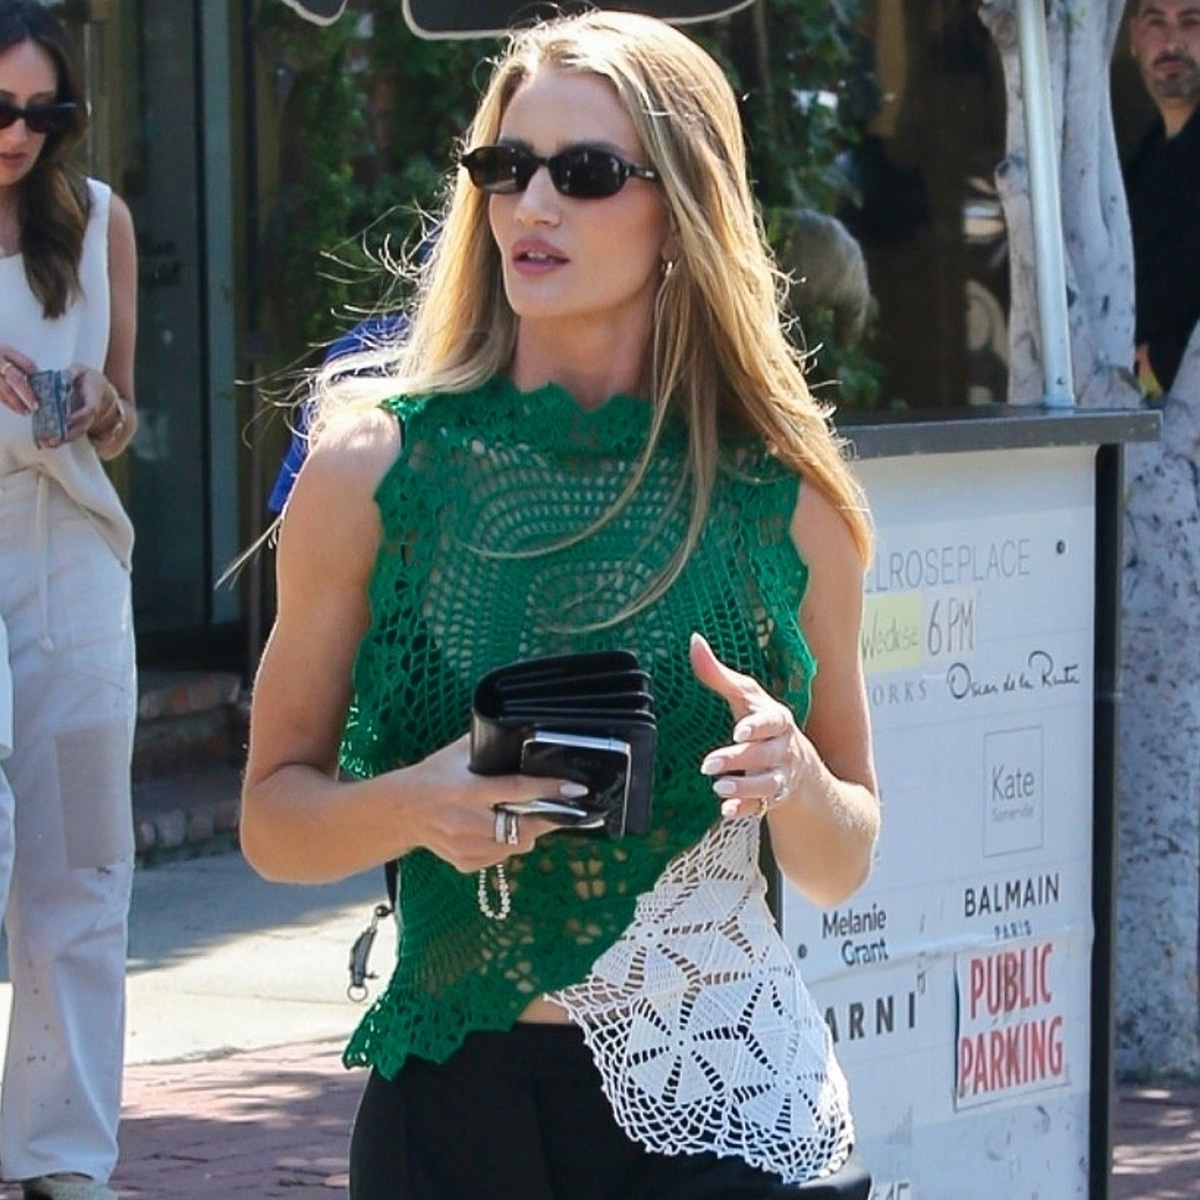 Rosie HW Just Proved That You Only Need This Item to Make Your Outfit Look Rich